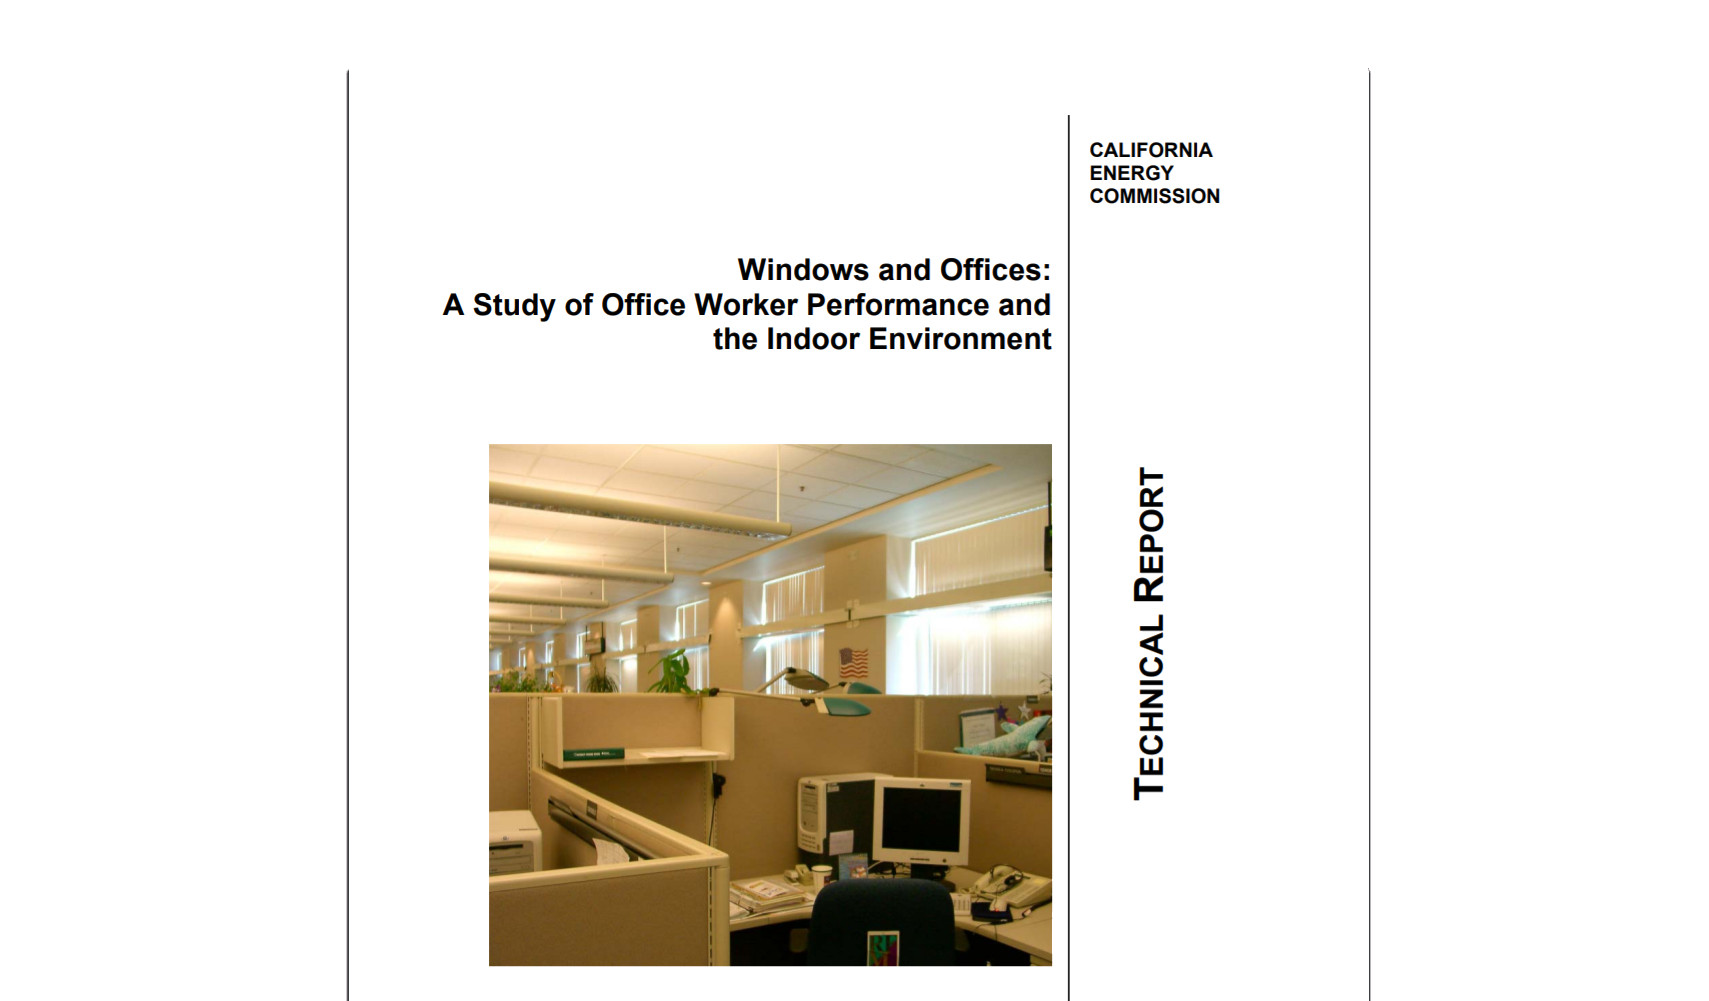 Windows and Offices: A Study of Office Worker Performance and the Indoor Environment